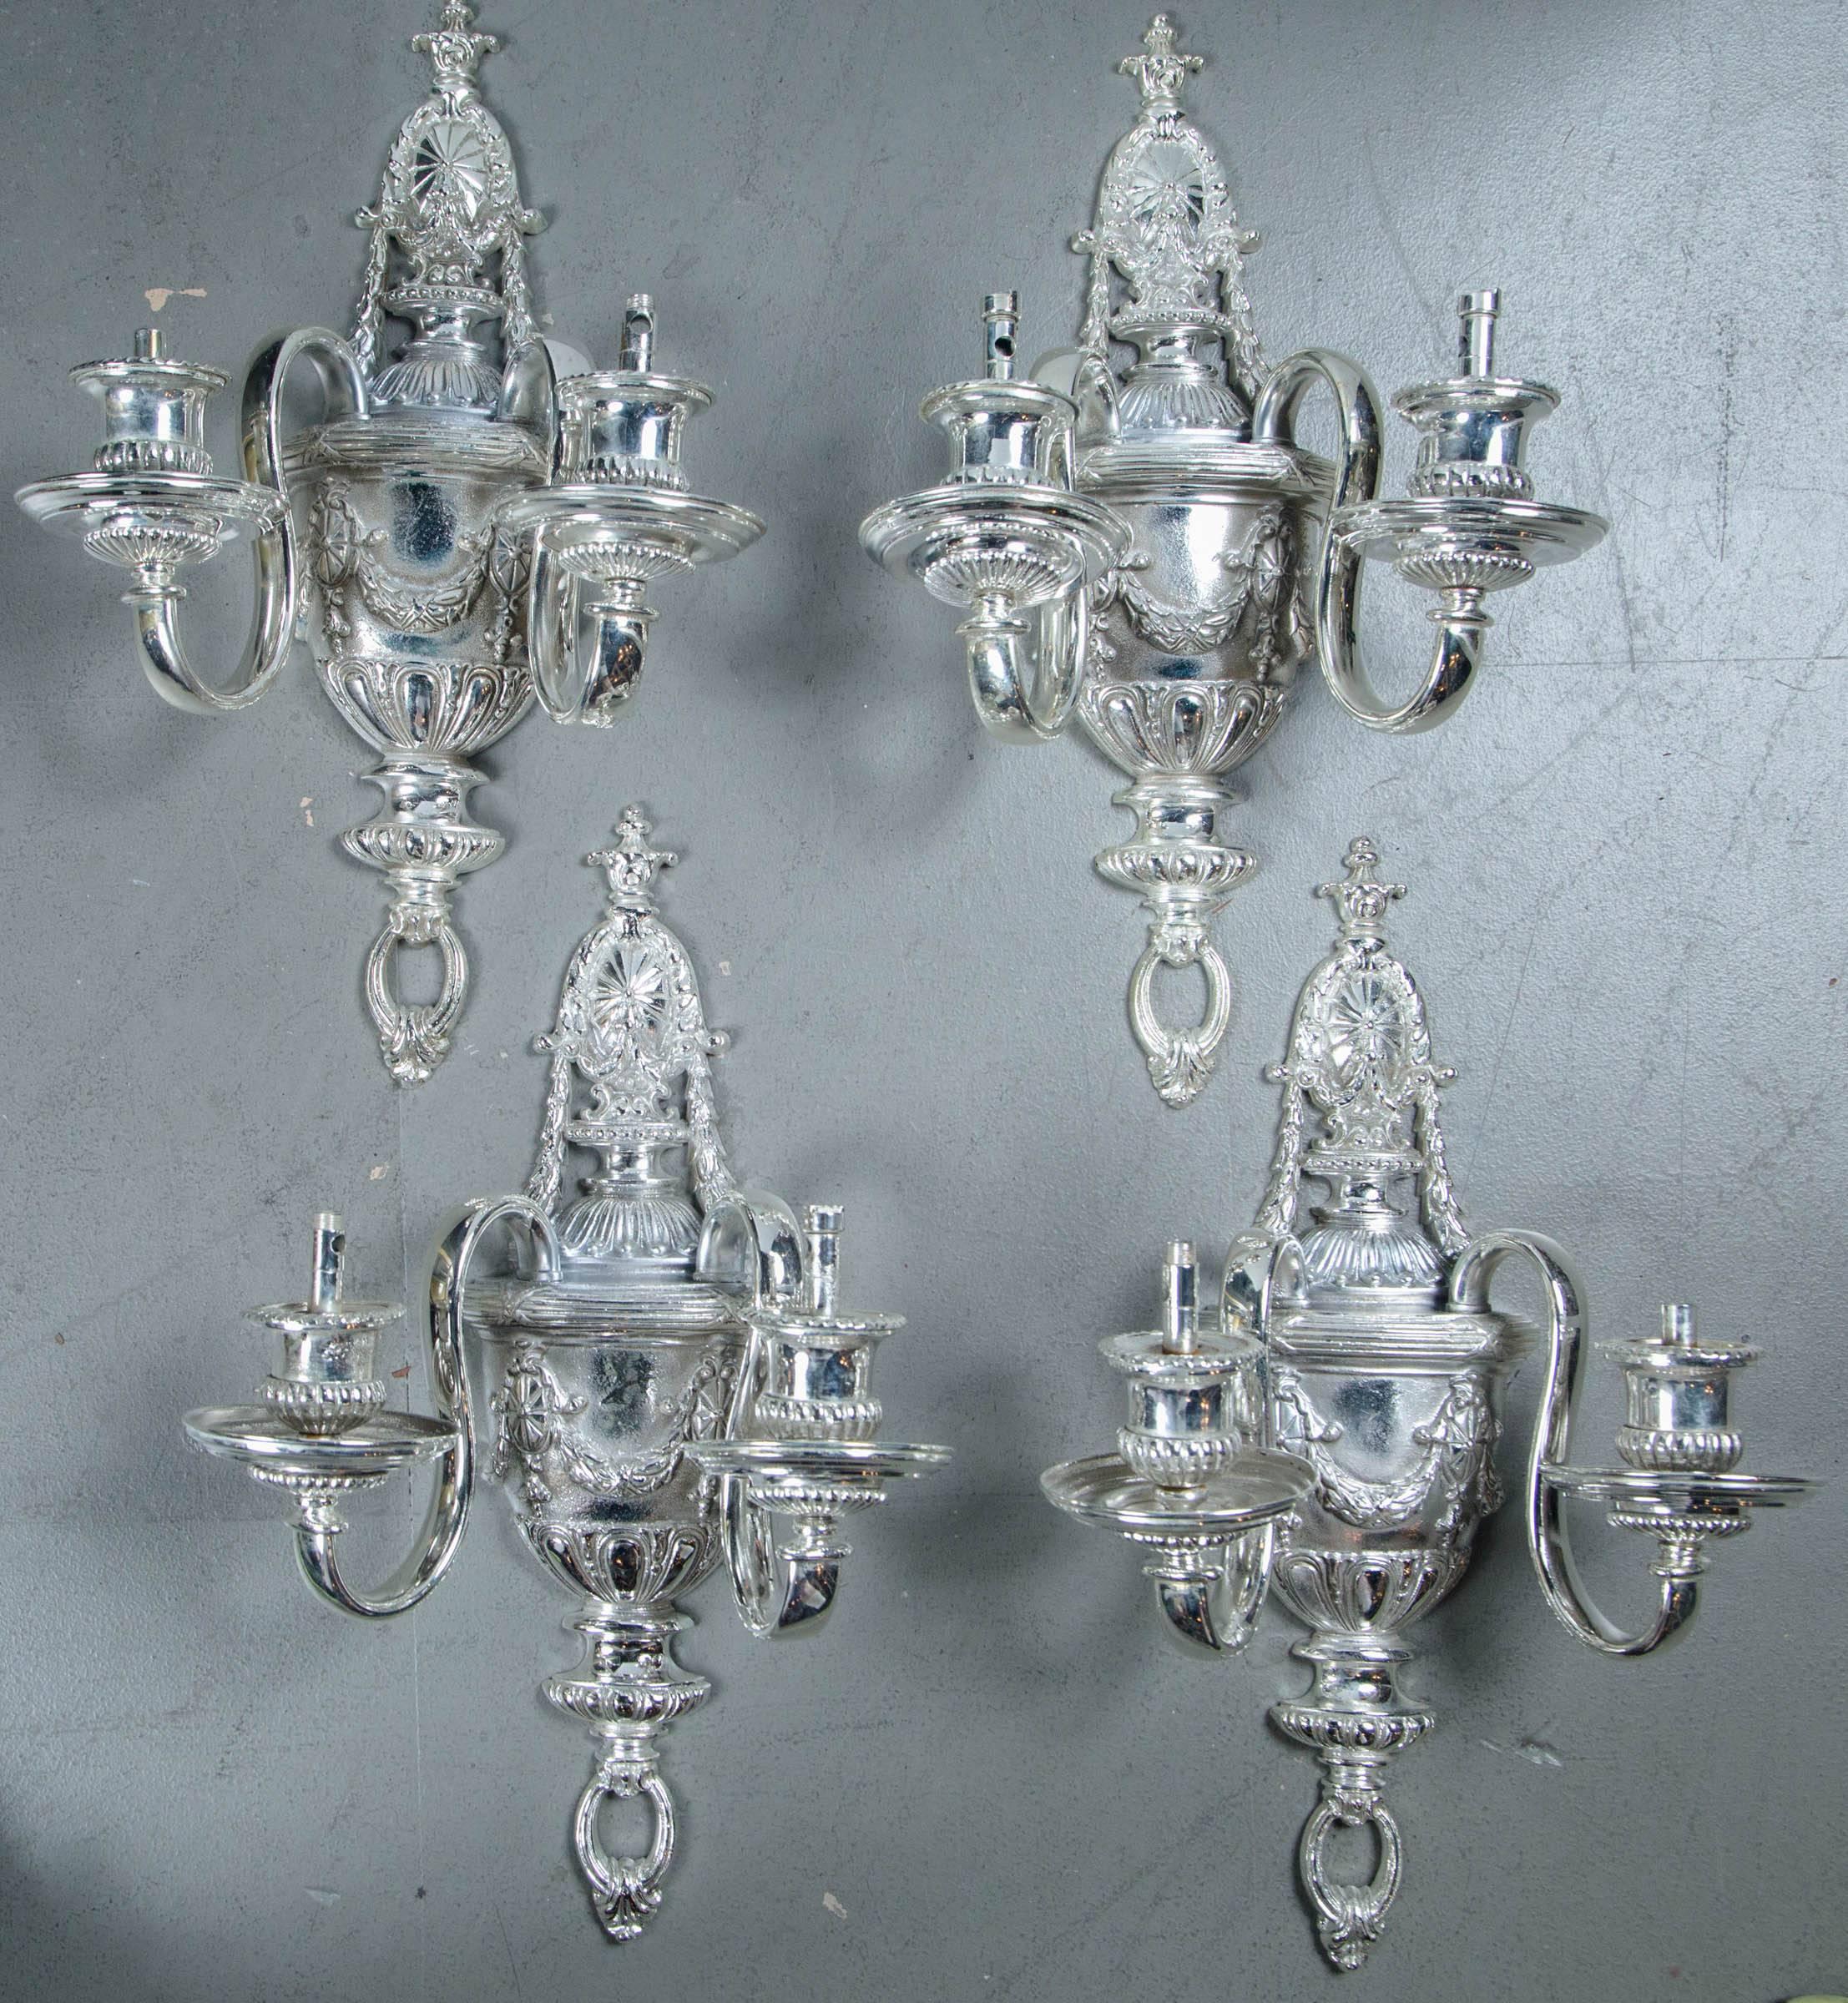 A set of four circa 1920 silver plated sconces; $4,800 per pair, two pairs available.